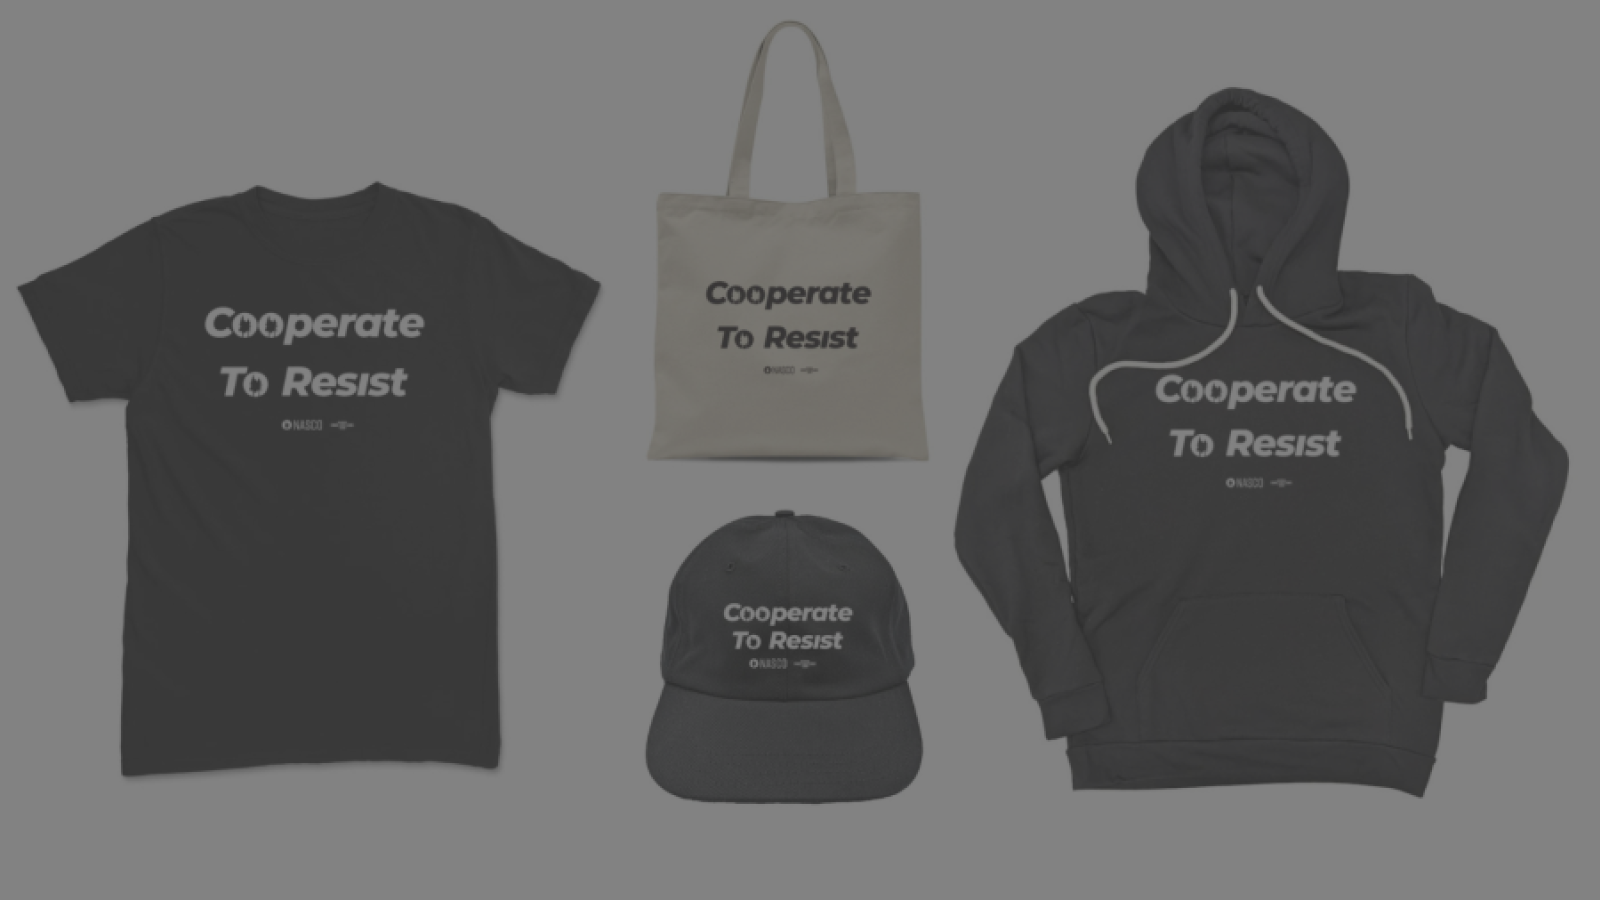 NASCO Merch pictured. 4 items with the words Cooperate to Resist followed by the NASCO logo and Worx Printing (smaller). The items are a black tshirt, tote bag, black baseball cap, and a black hooded sweatshirt. 